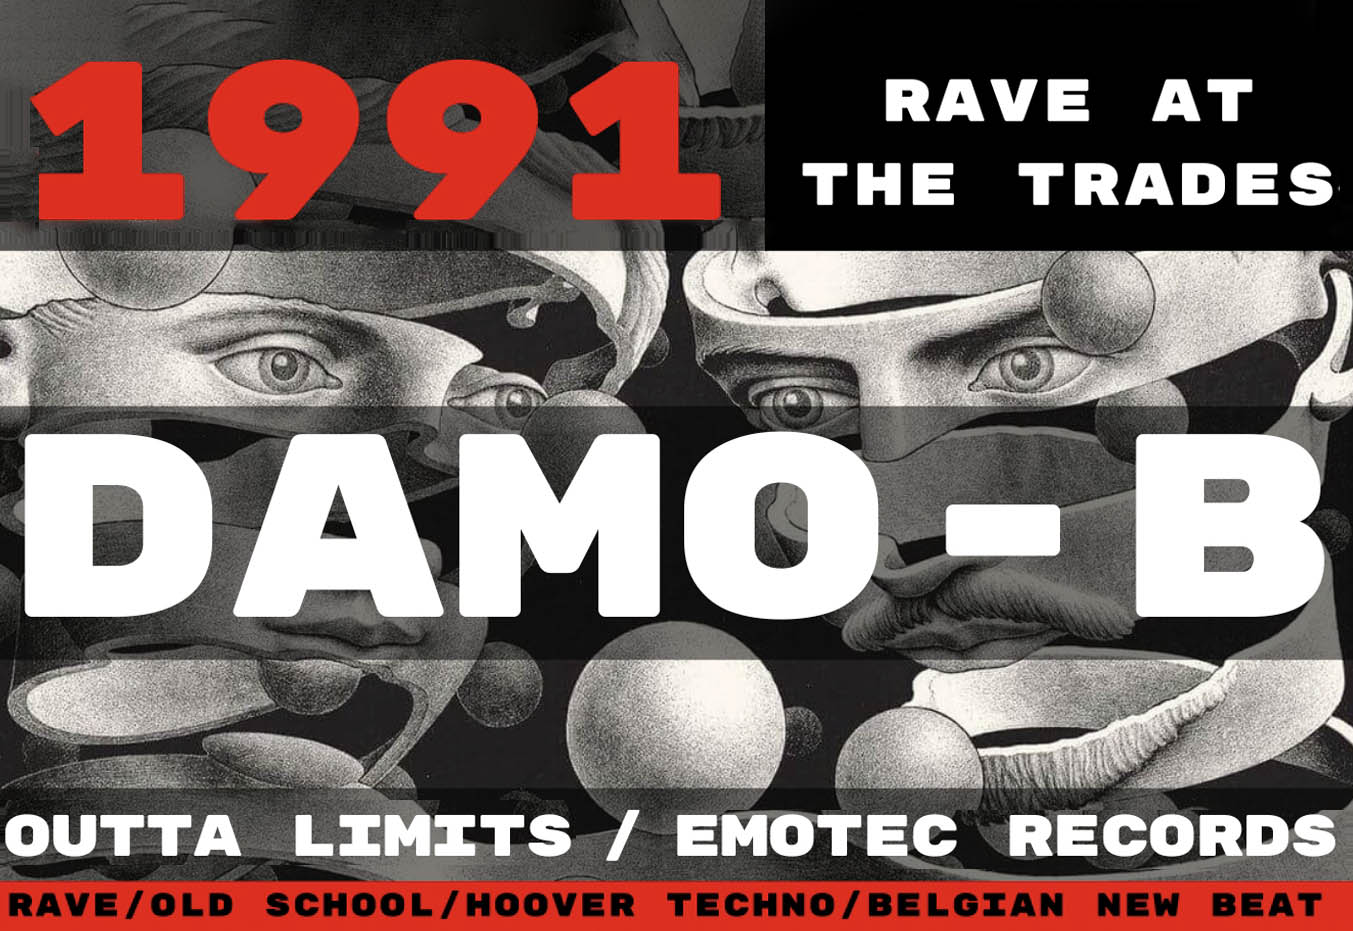 1991 Rave At The Trades